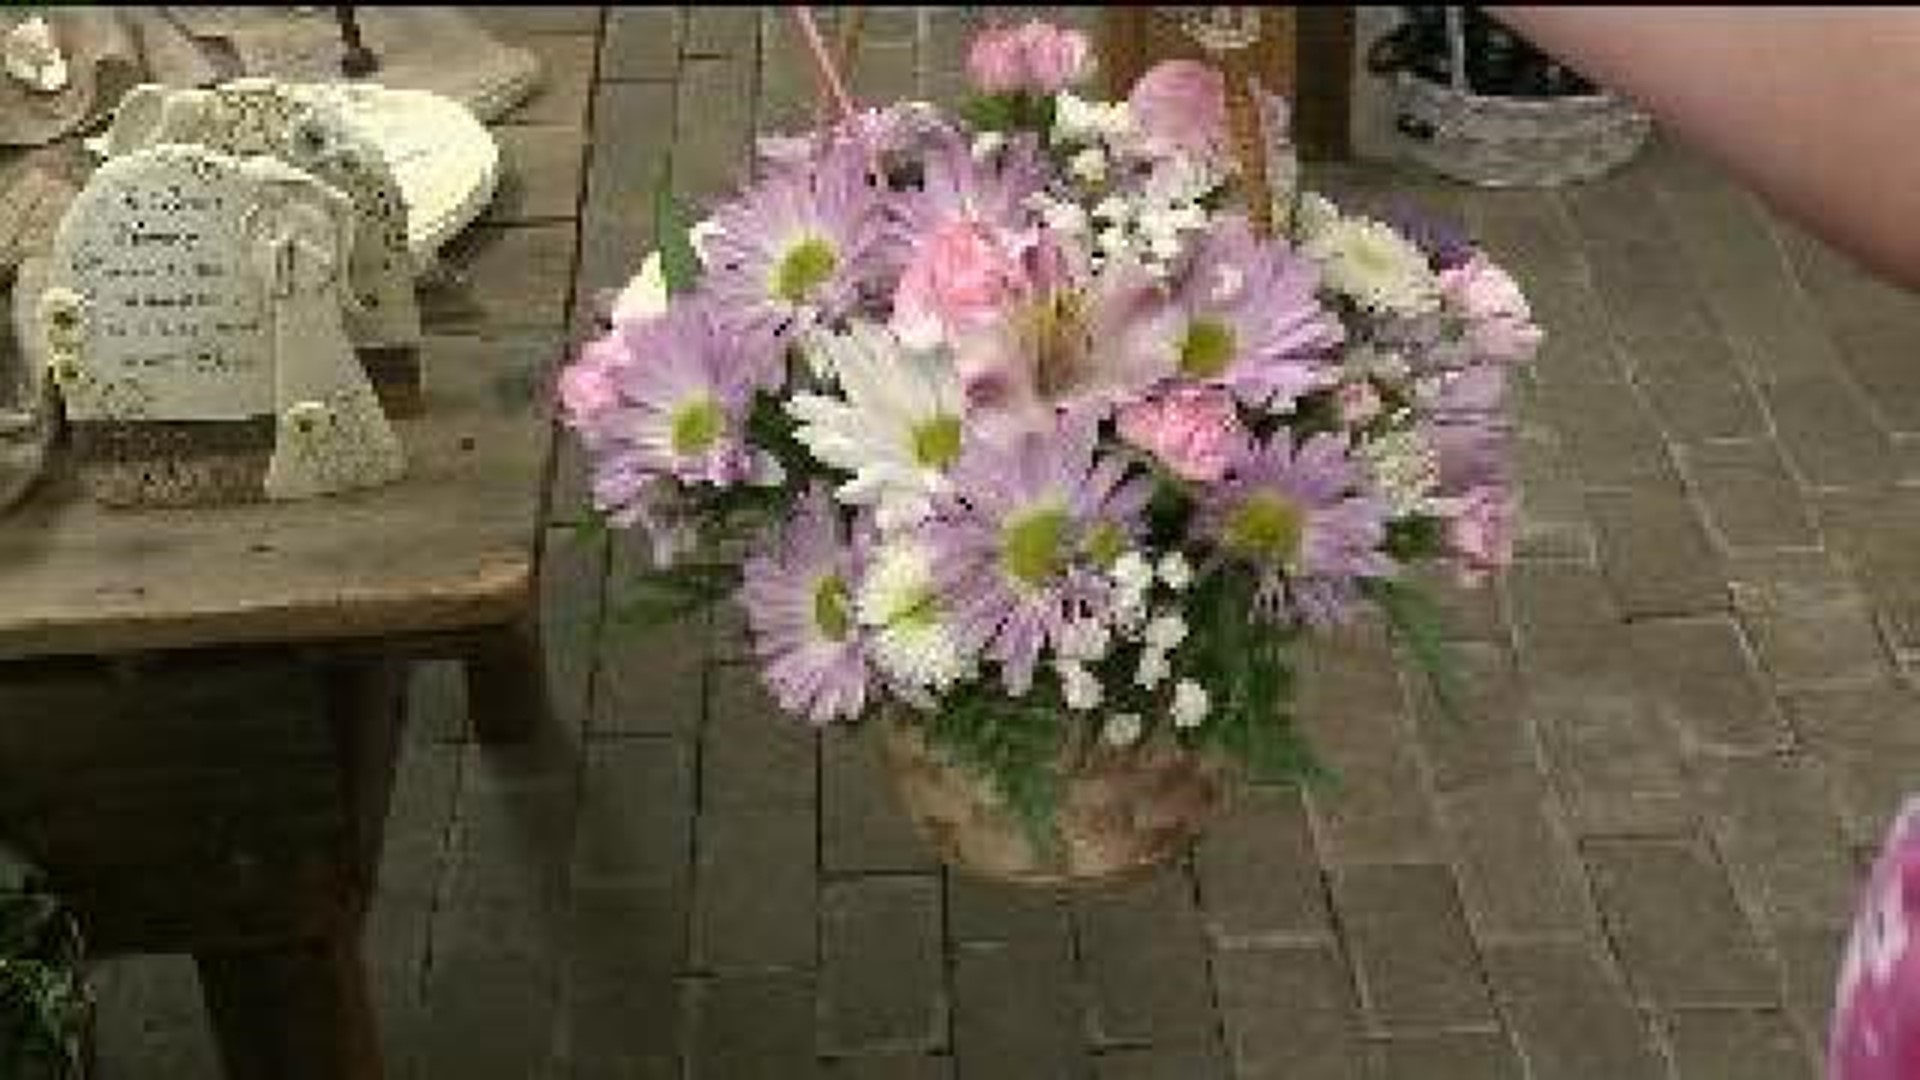 Mother’s Day Flowers Mean Big Business